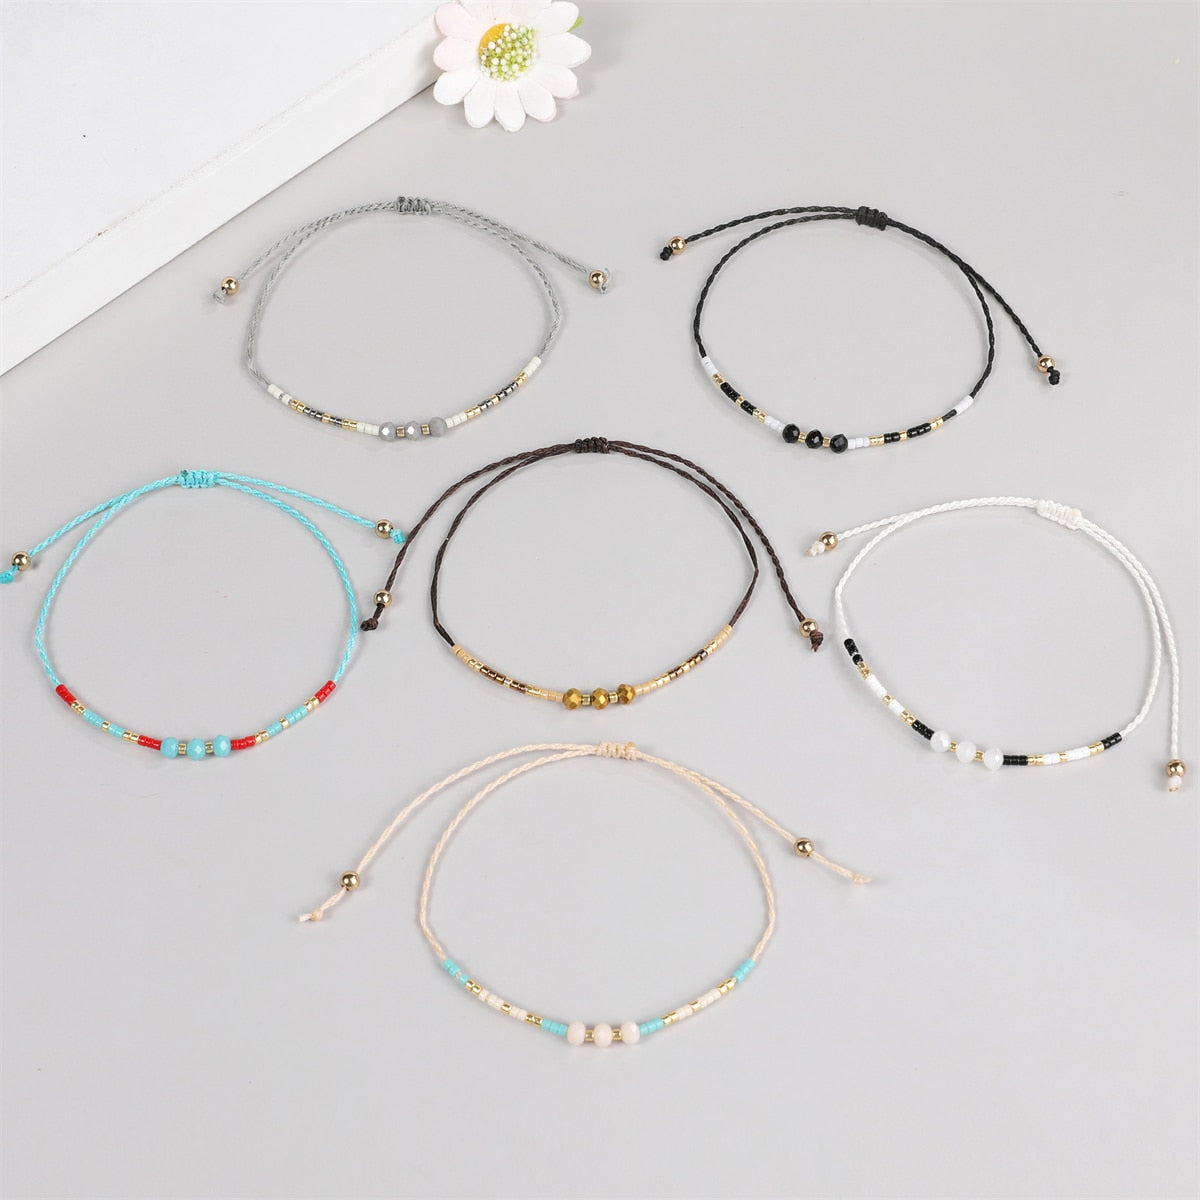 12Pcs Faceted Crystal Seeds Beaded Pearl Braceles Anklets Adjustable Braided Wax Rope Chain Wristband Cuff Boho Jewelry